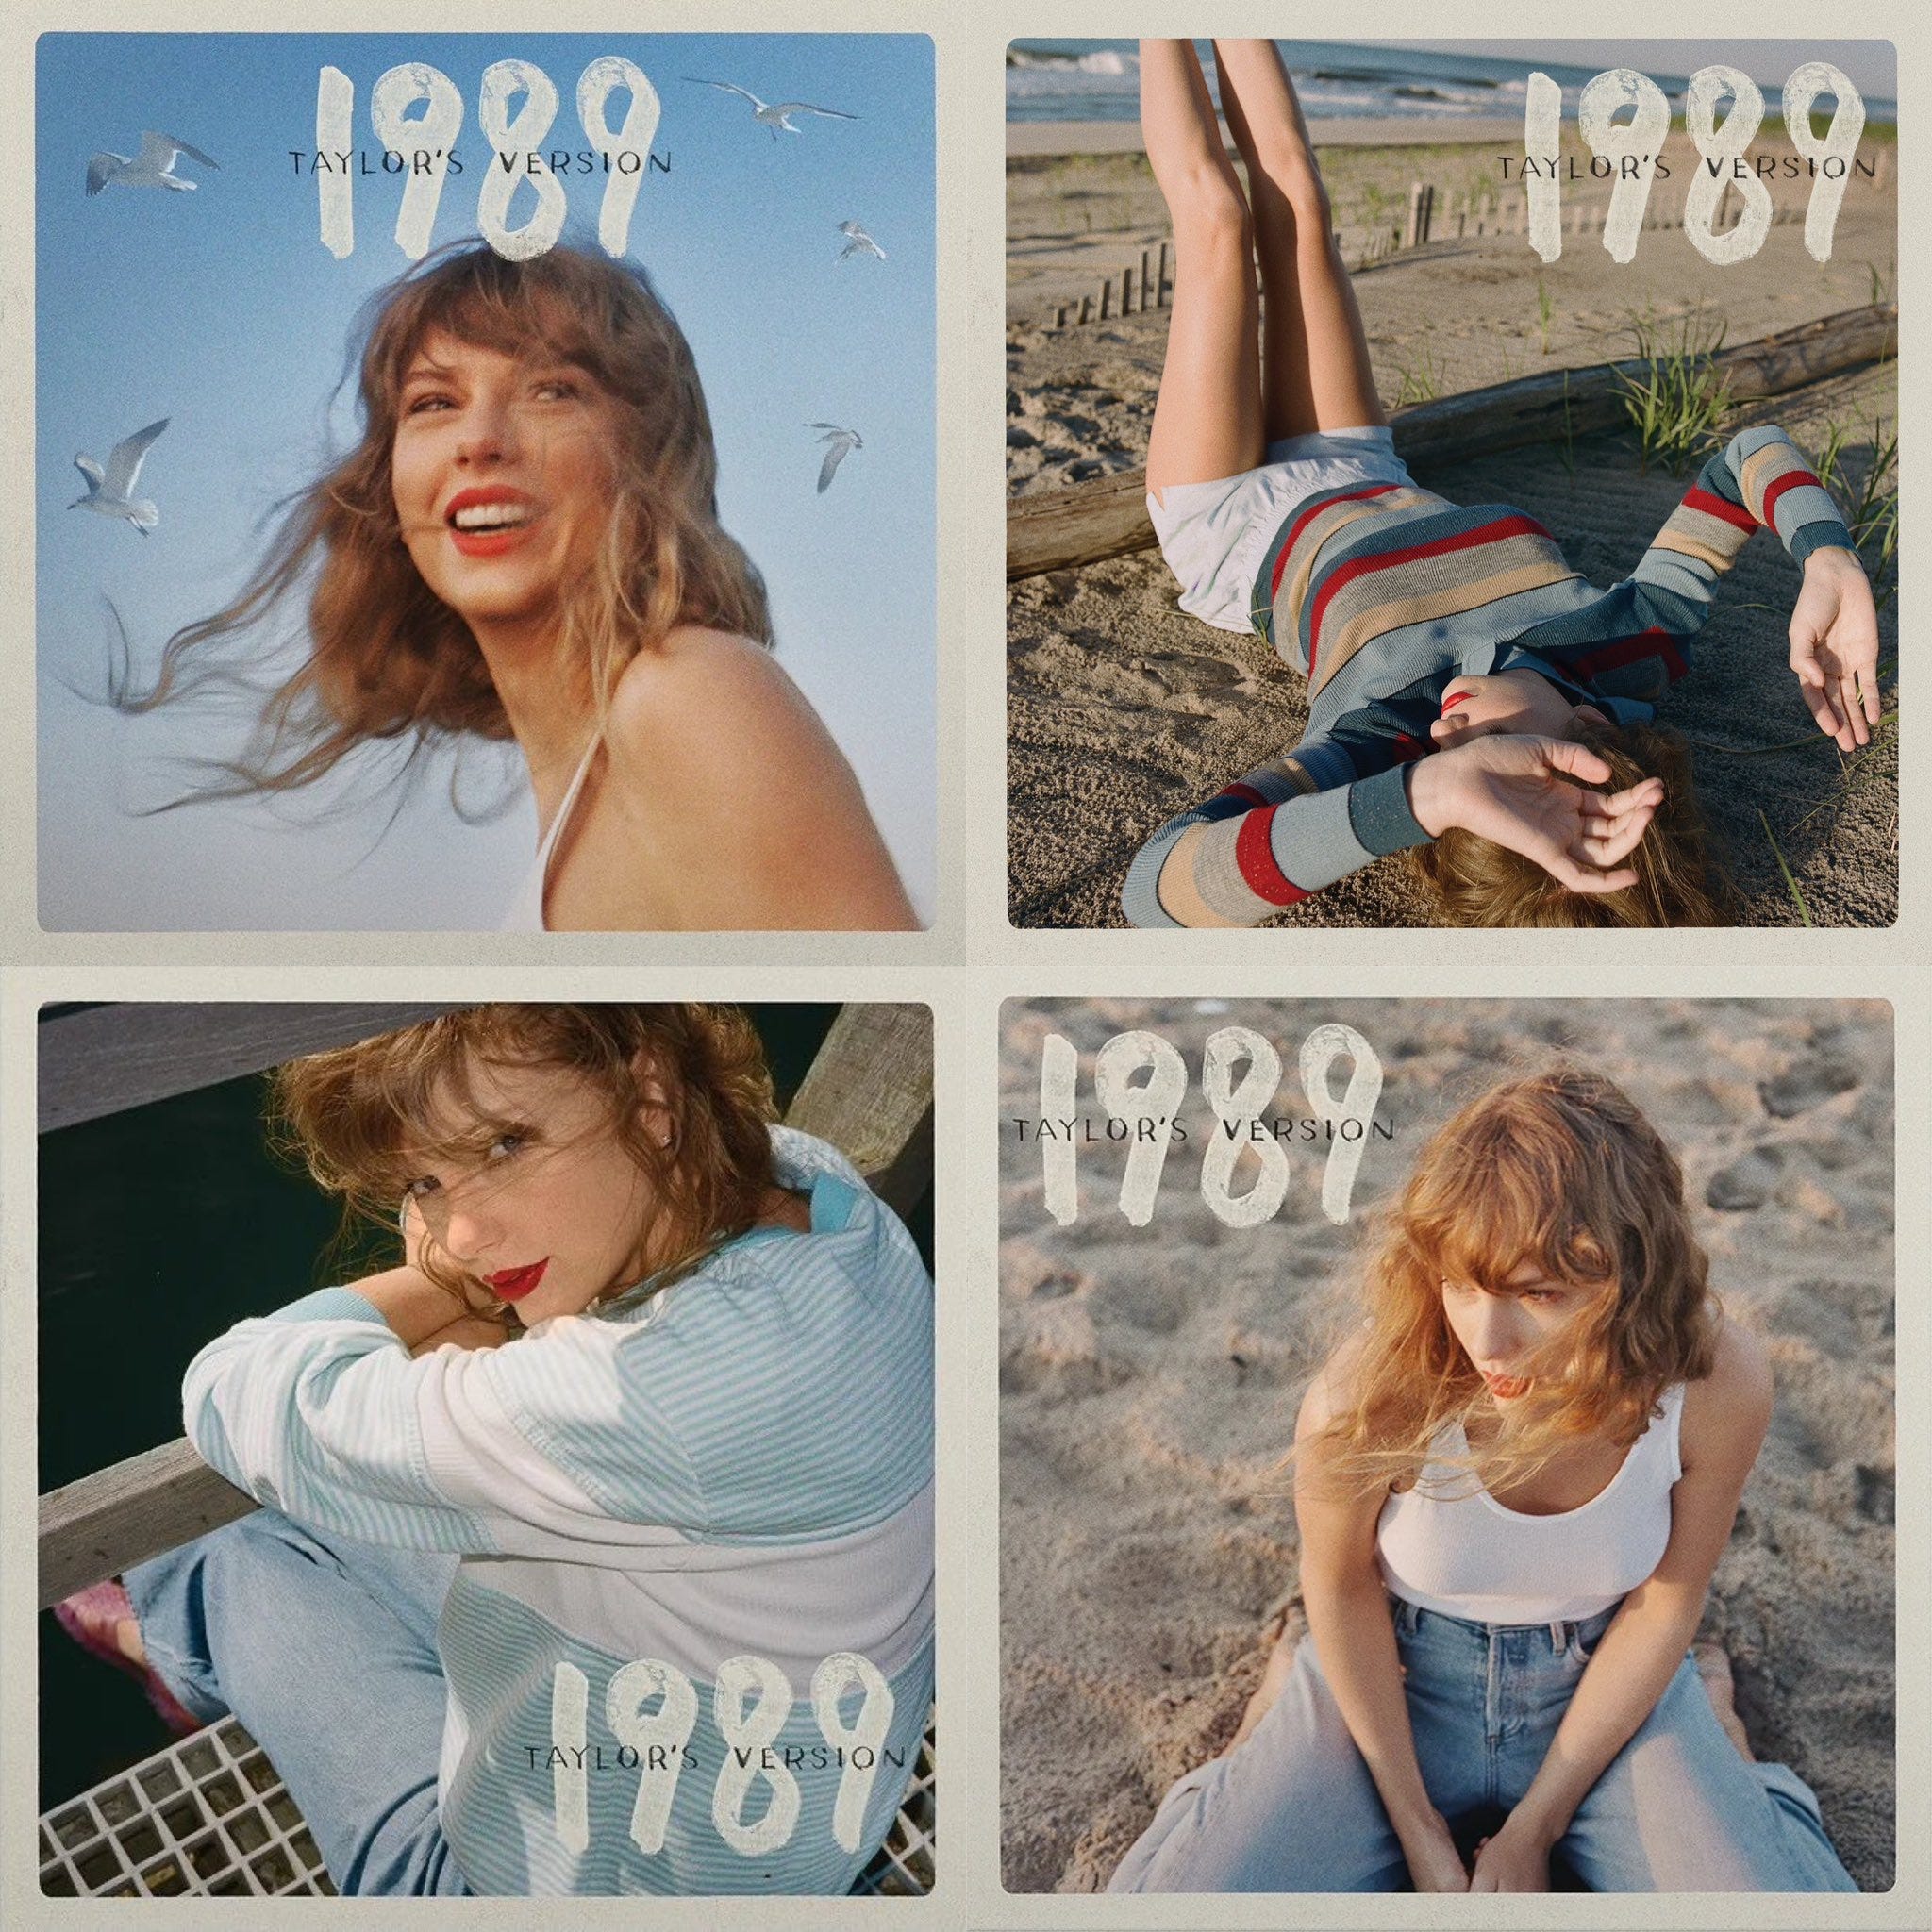 In honor of Midnights: here is every Taylor Swift album as a custom ch